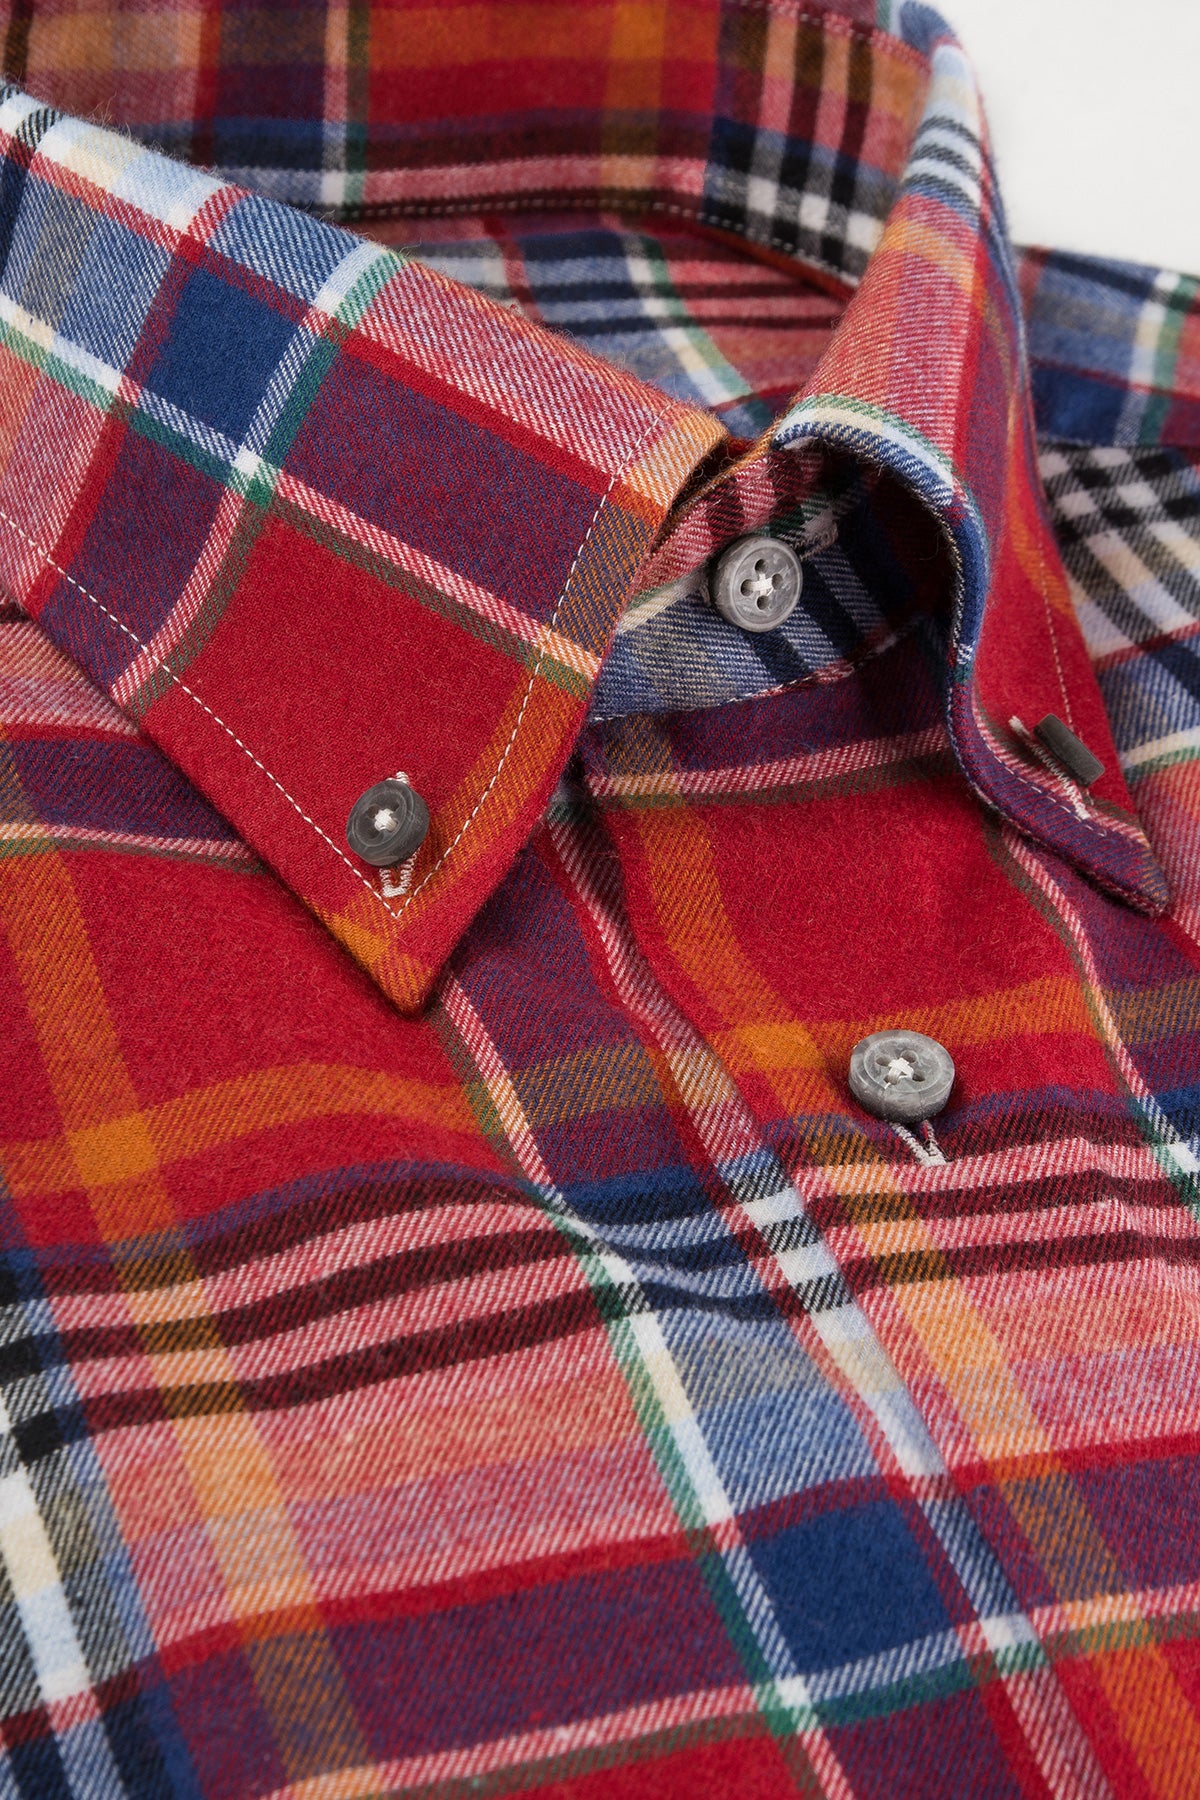 Red checked flannel button down regular fit shirt